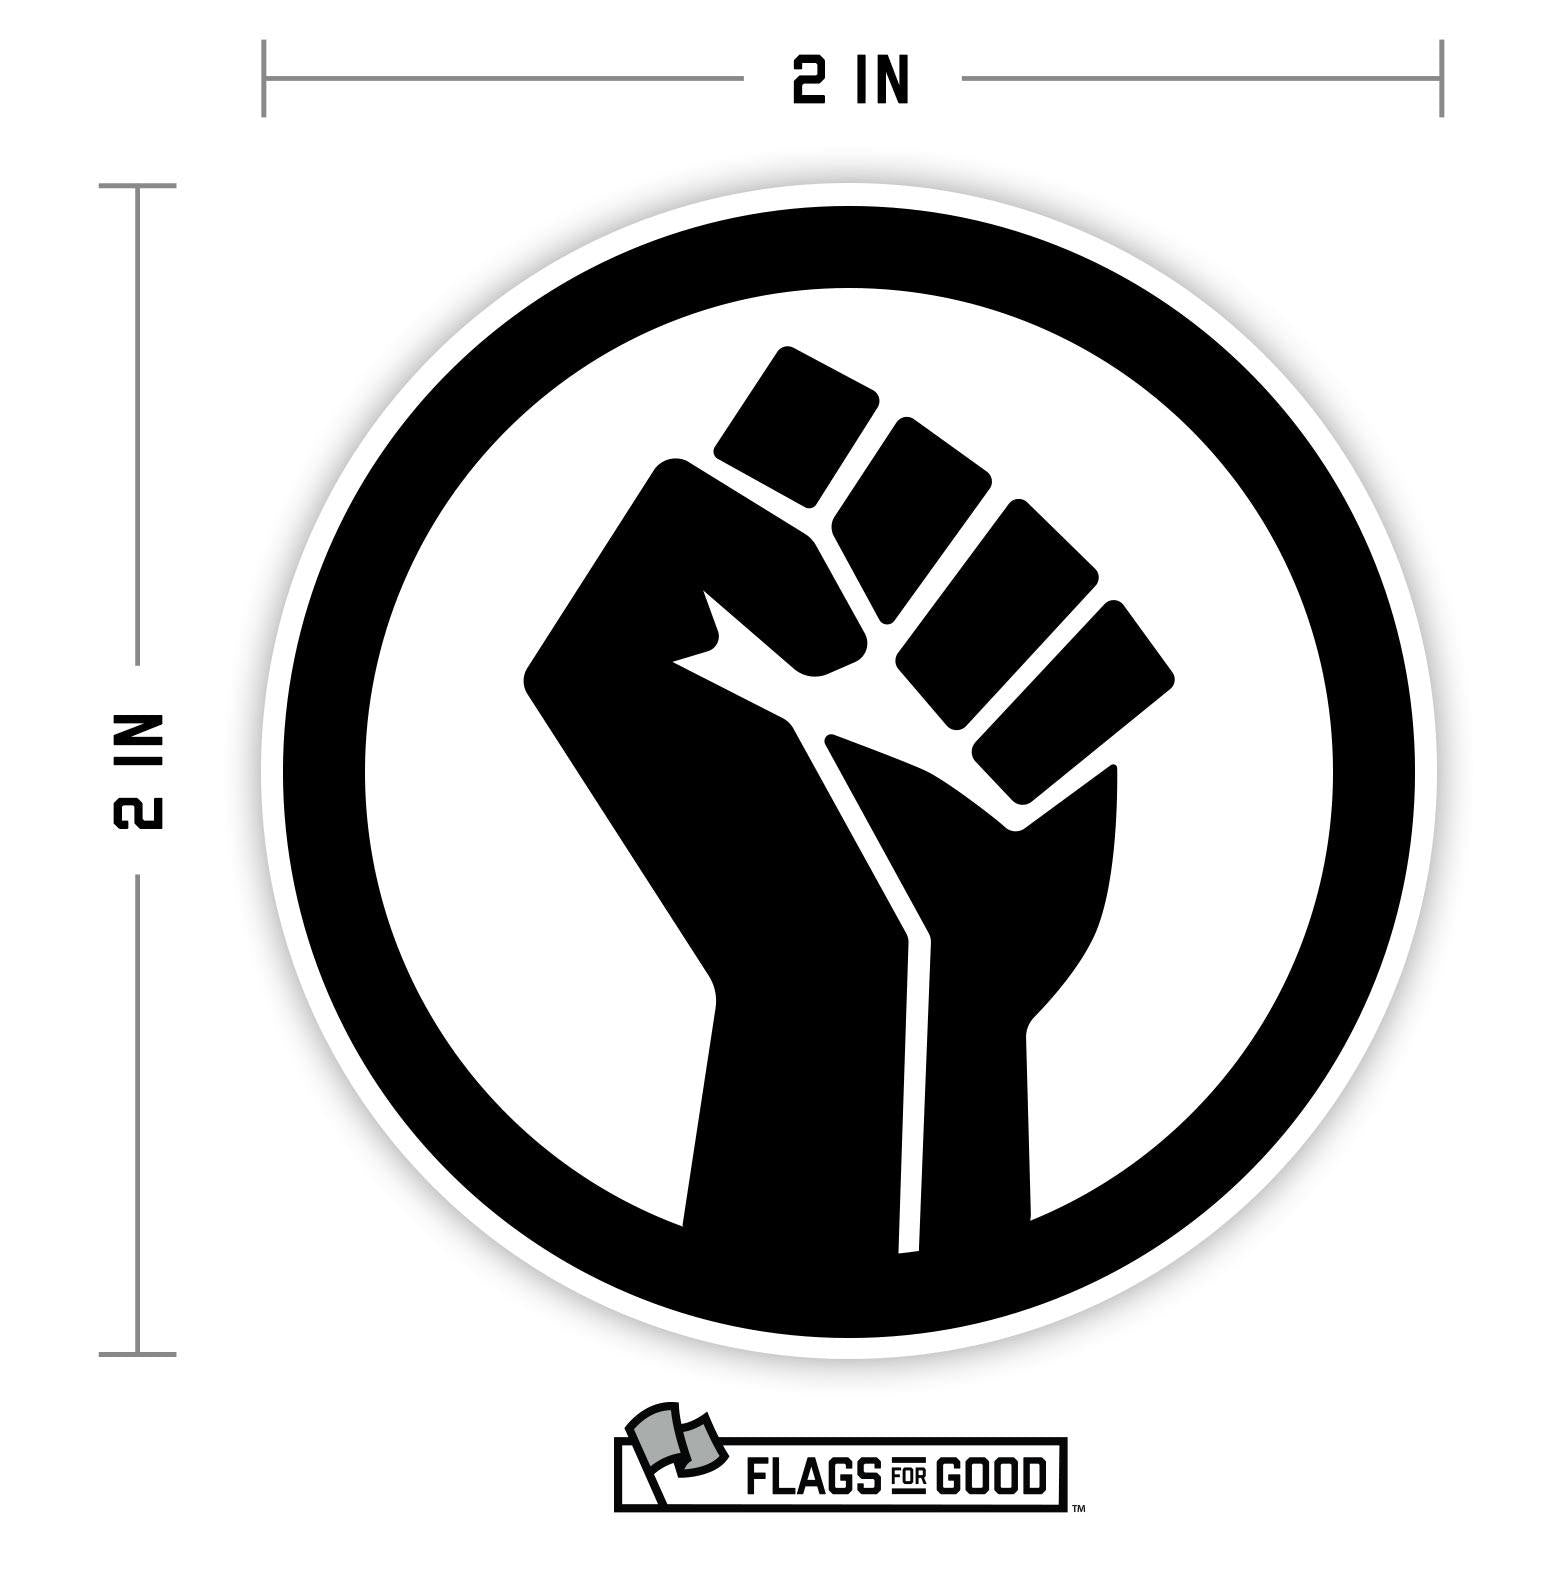 3-pack fist only BLM stickers